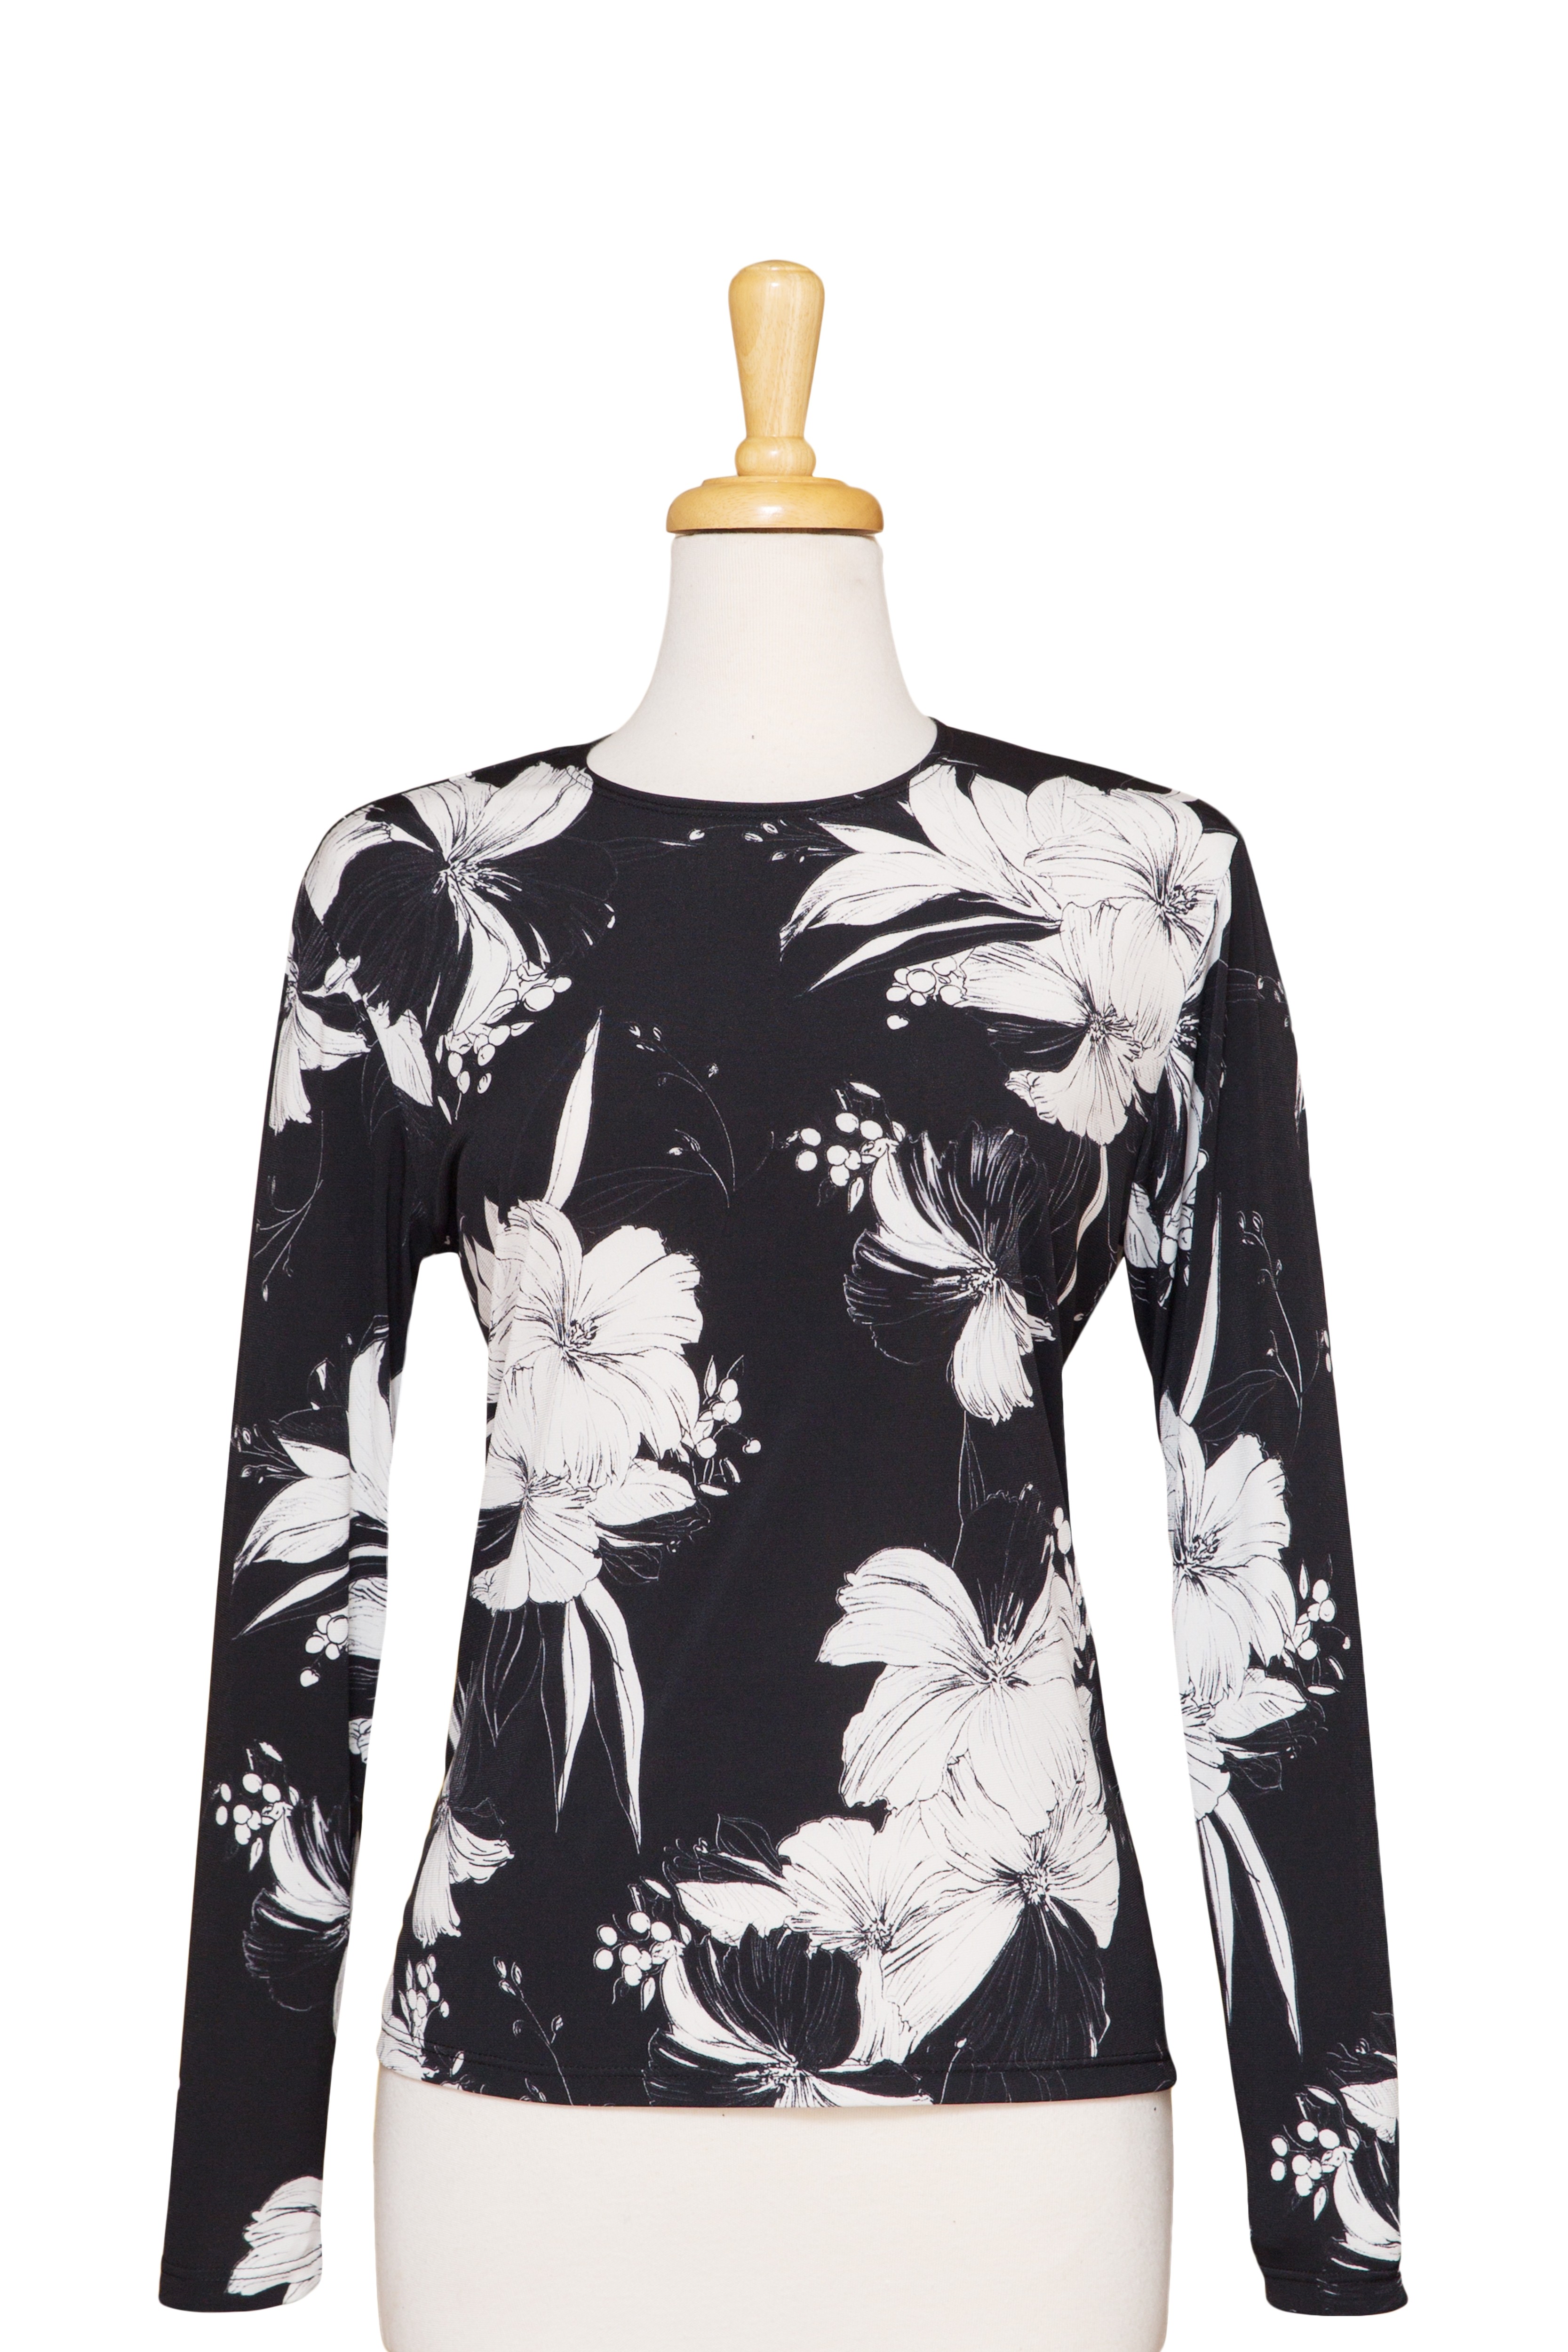 Black And White Floral Long Sleeve Microfiber Sleeve Top - CLEARANCE